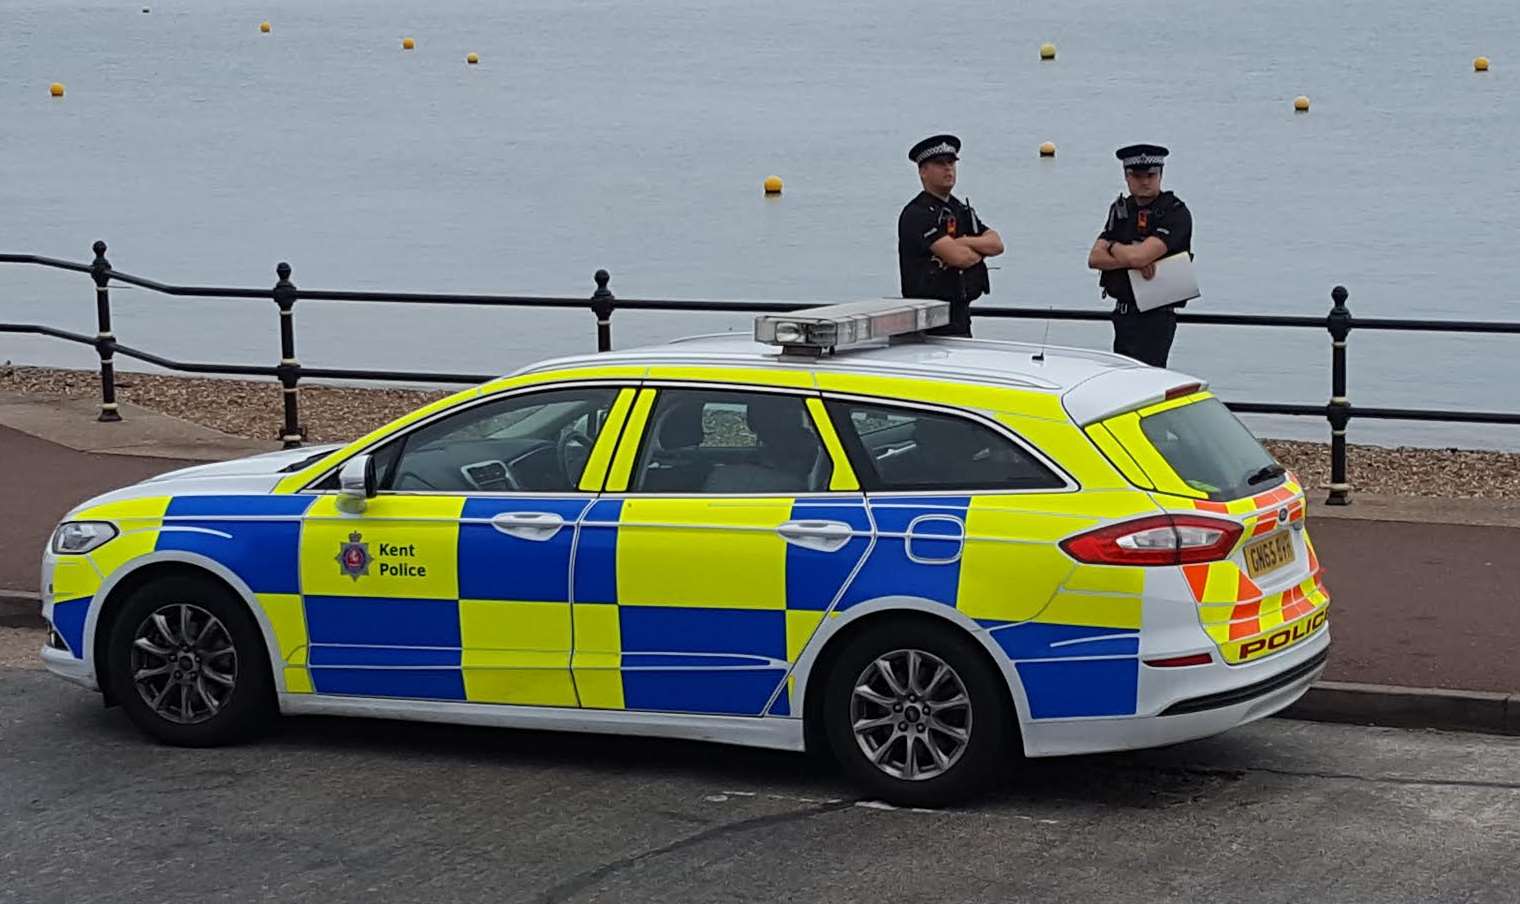 Police close to the spot where a body was found at Herne Bay beach.